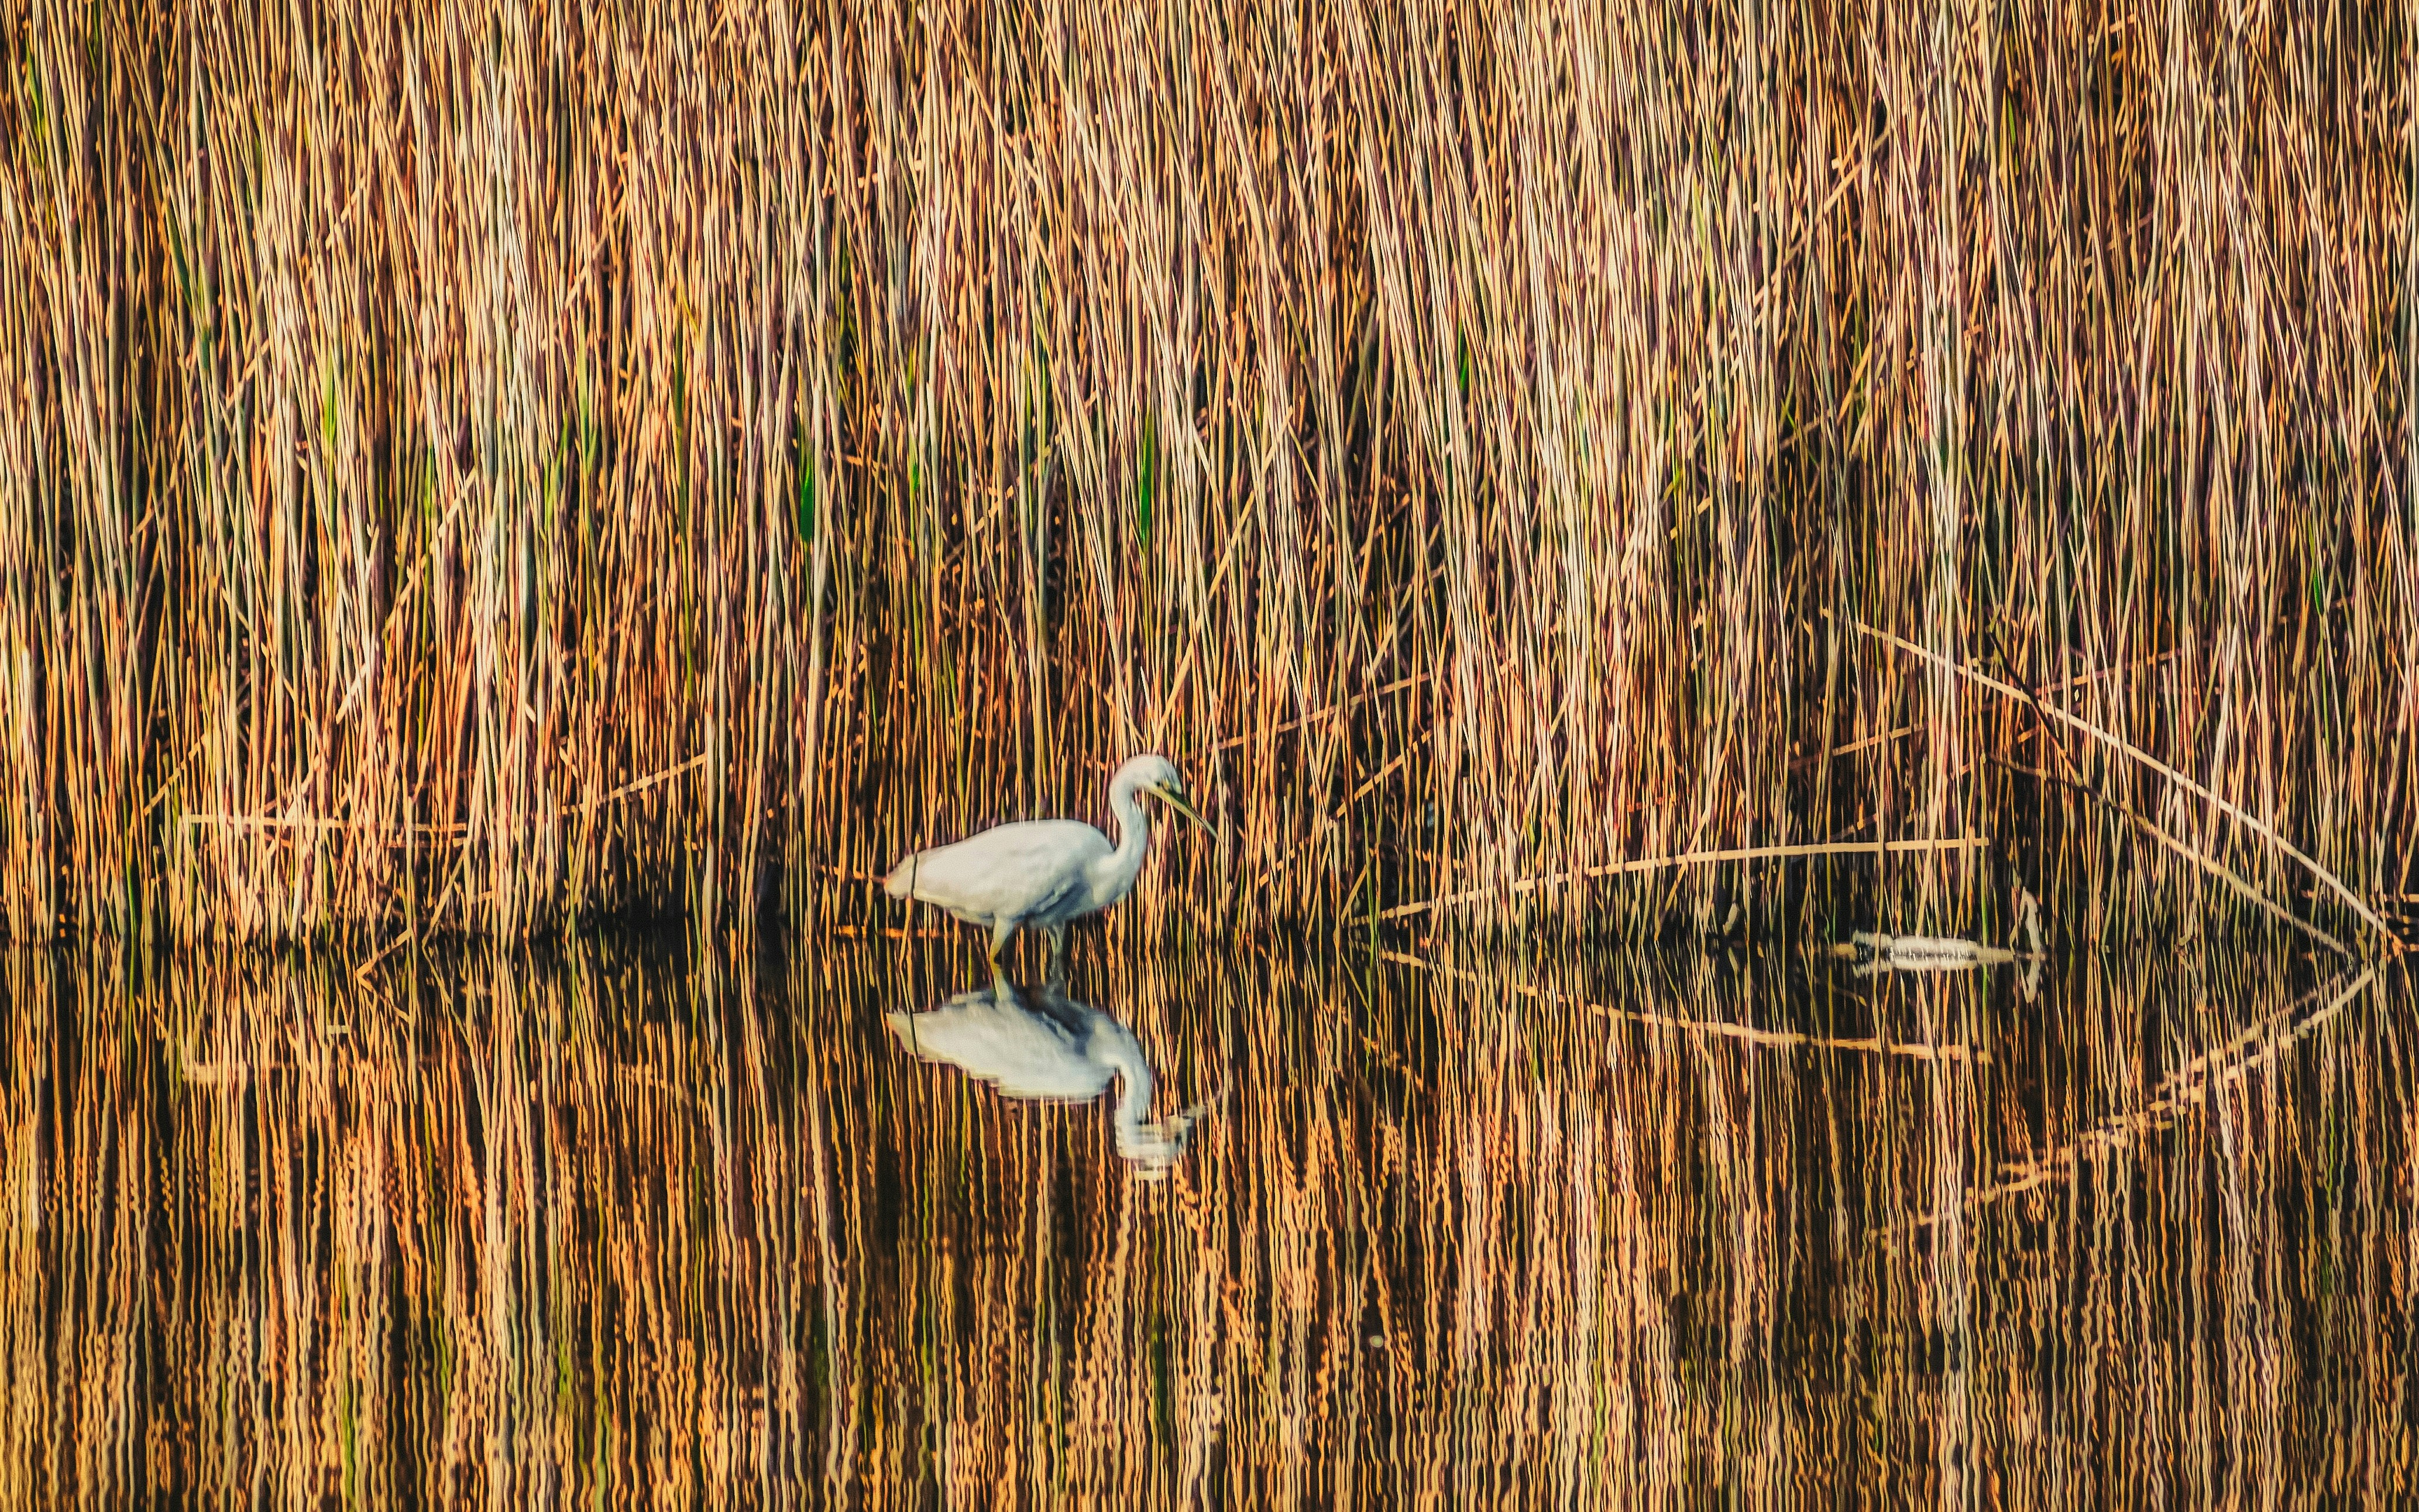 A great white egret (Ardea alba) hunts along a reed bed in Victoria Park in East Belfast (Apr., 2020).